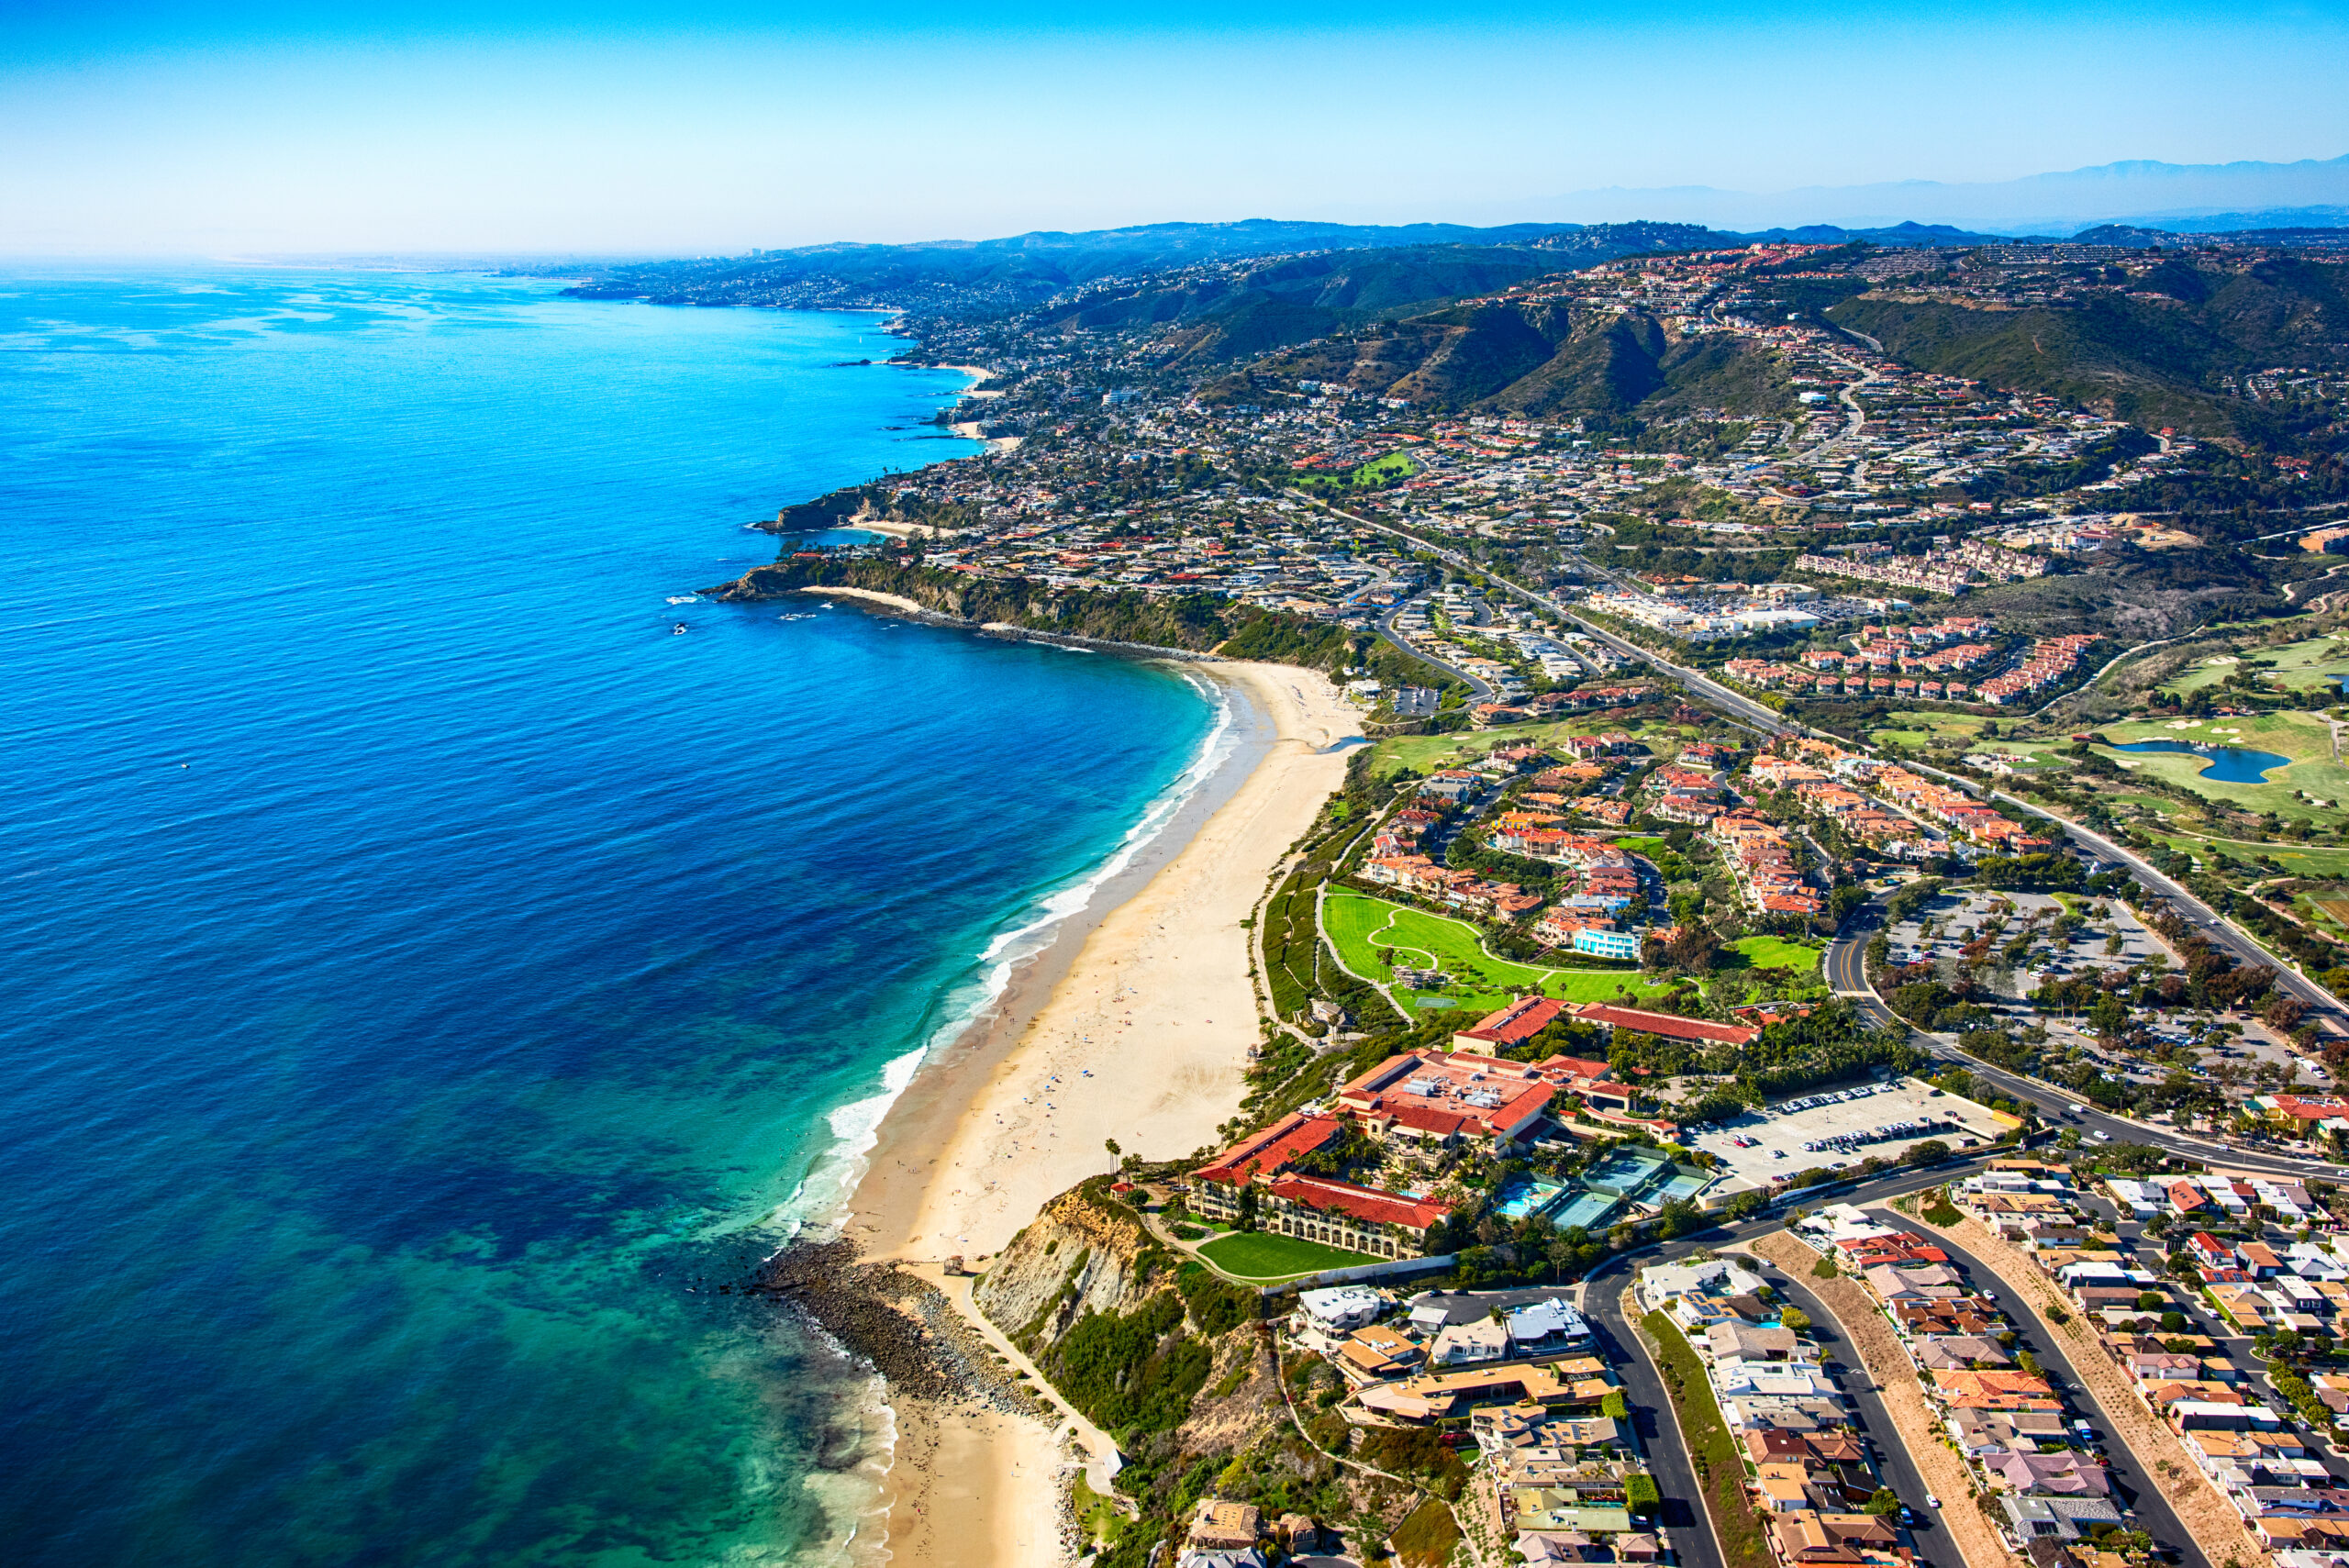 The Top 10 Dana Point Tours, Tickets & Activities 2023